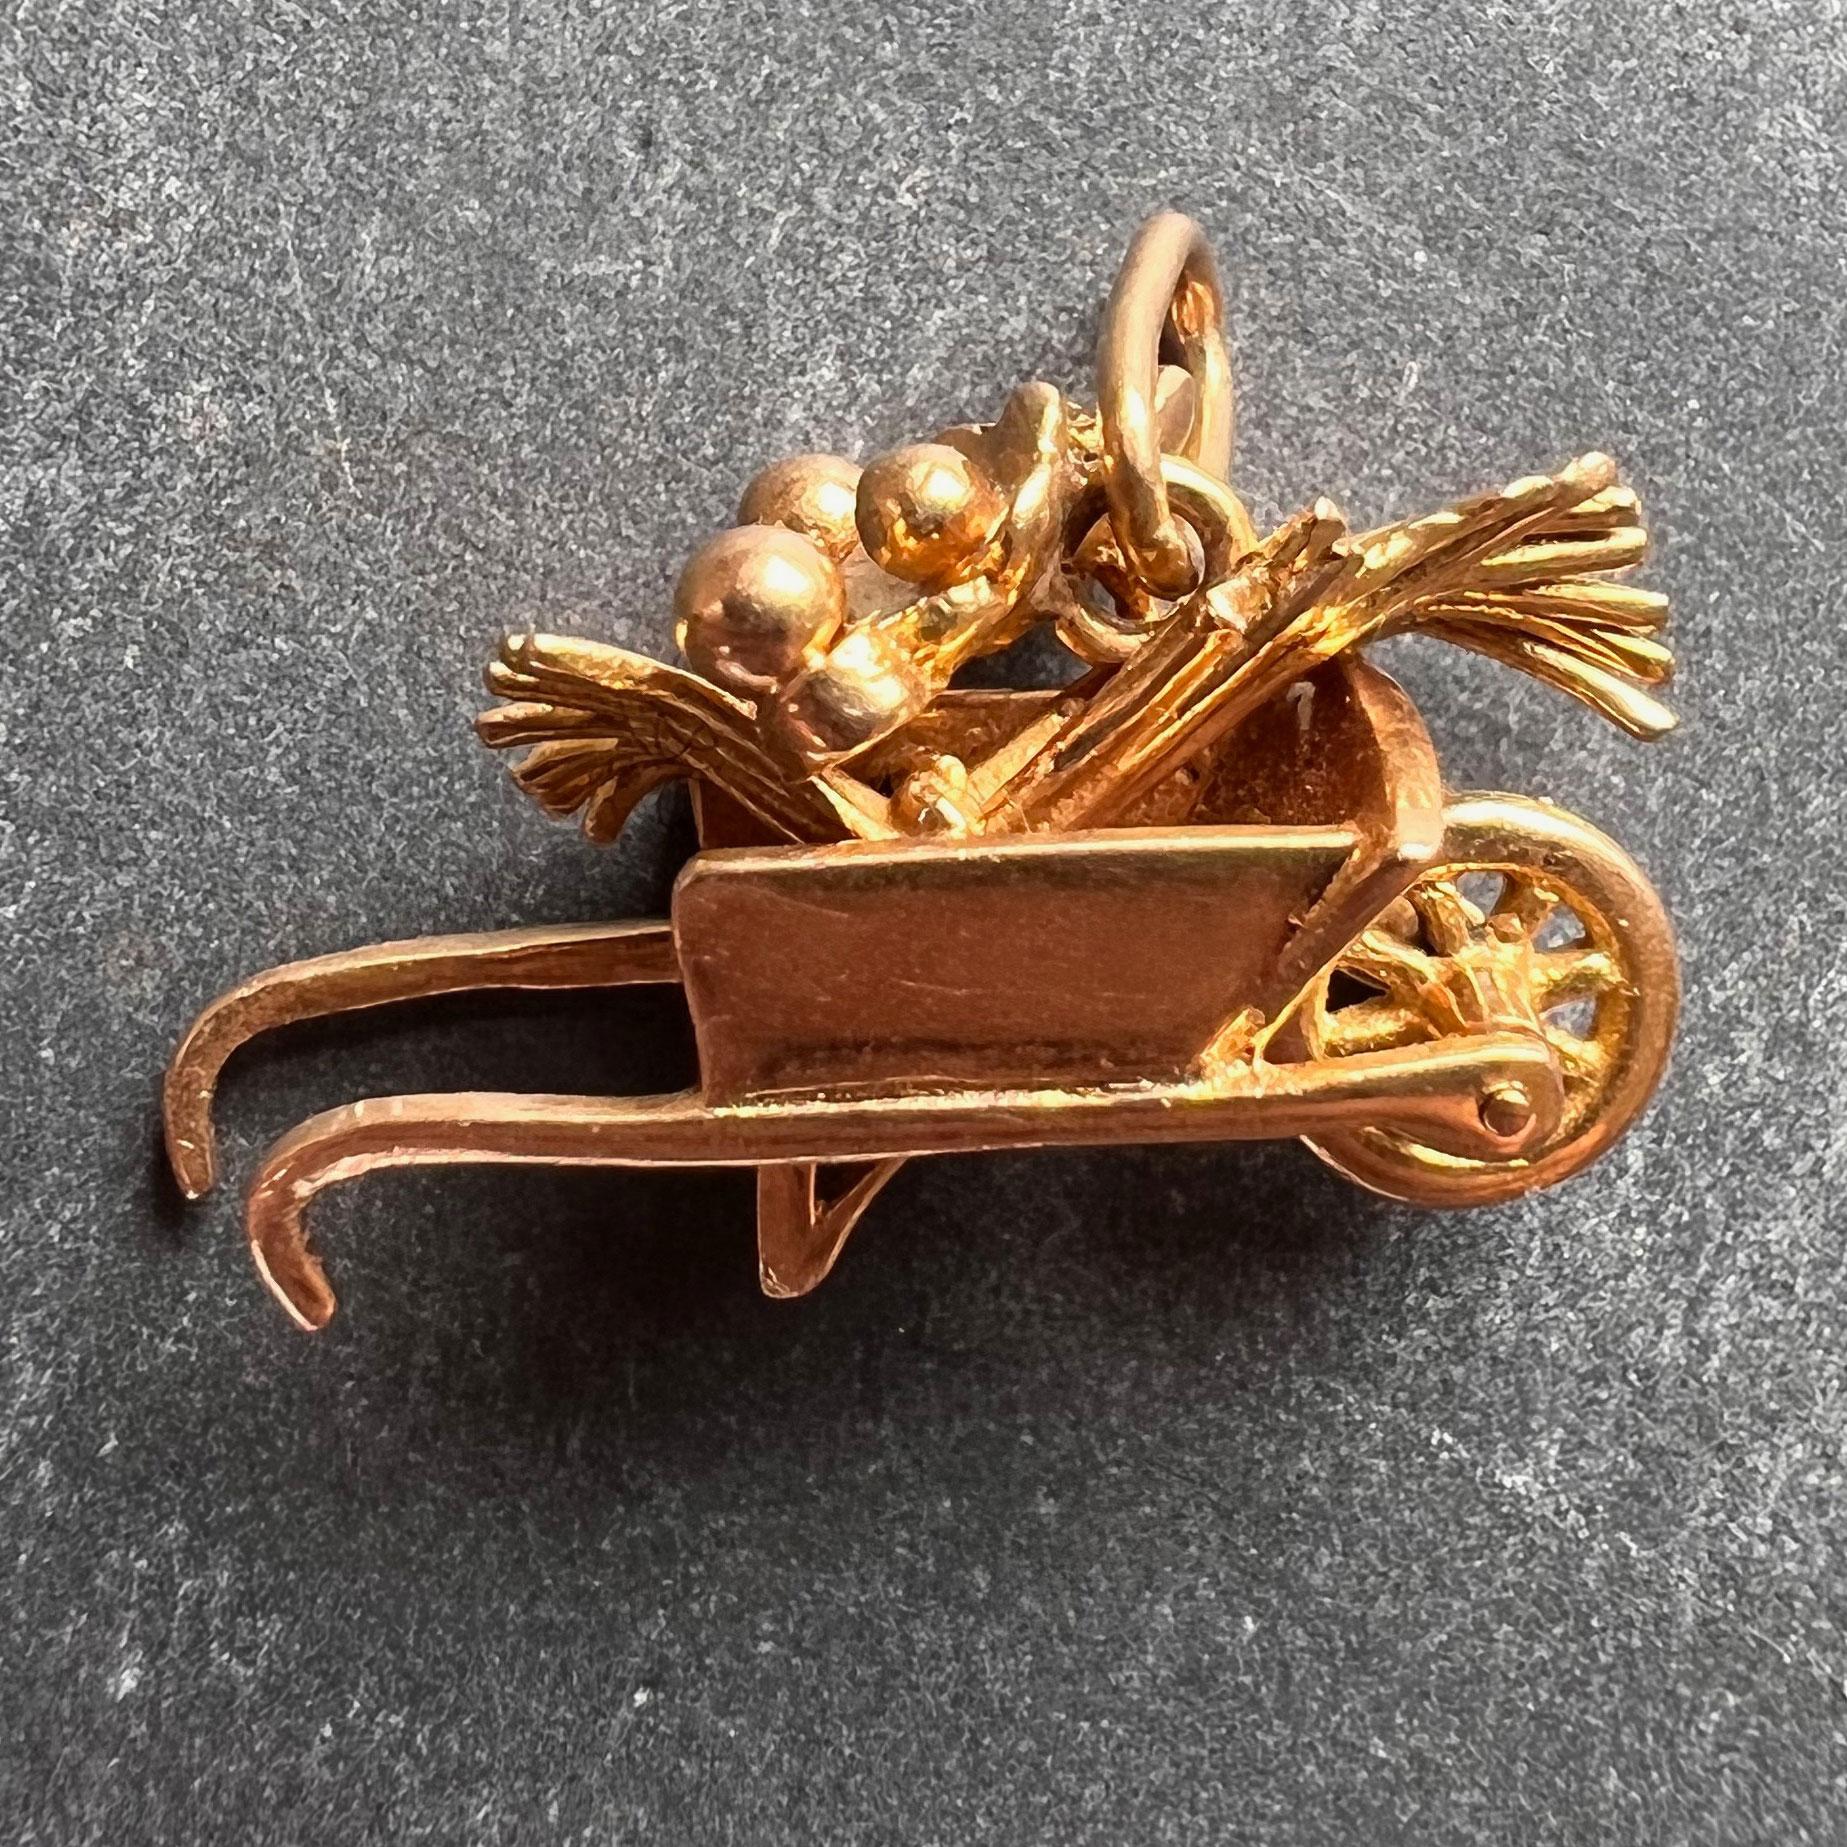 An 18 karat (18K) yellow gold charm pendant designed as a wheelbarrow filled with flowers, with a rotating front wheel. Stamped with the eagle’s head for French manufacture and 18 karat gold and an unknown makers’ mark.

Dimensions: 1.2 x 2.1 x 0.8